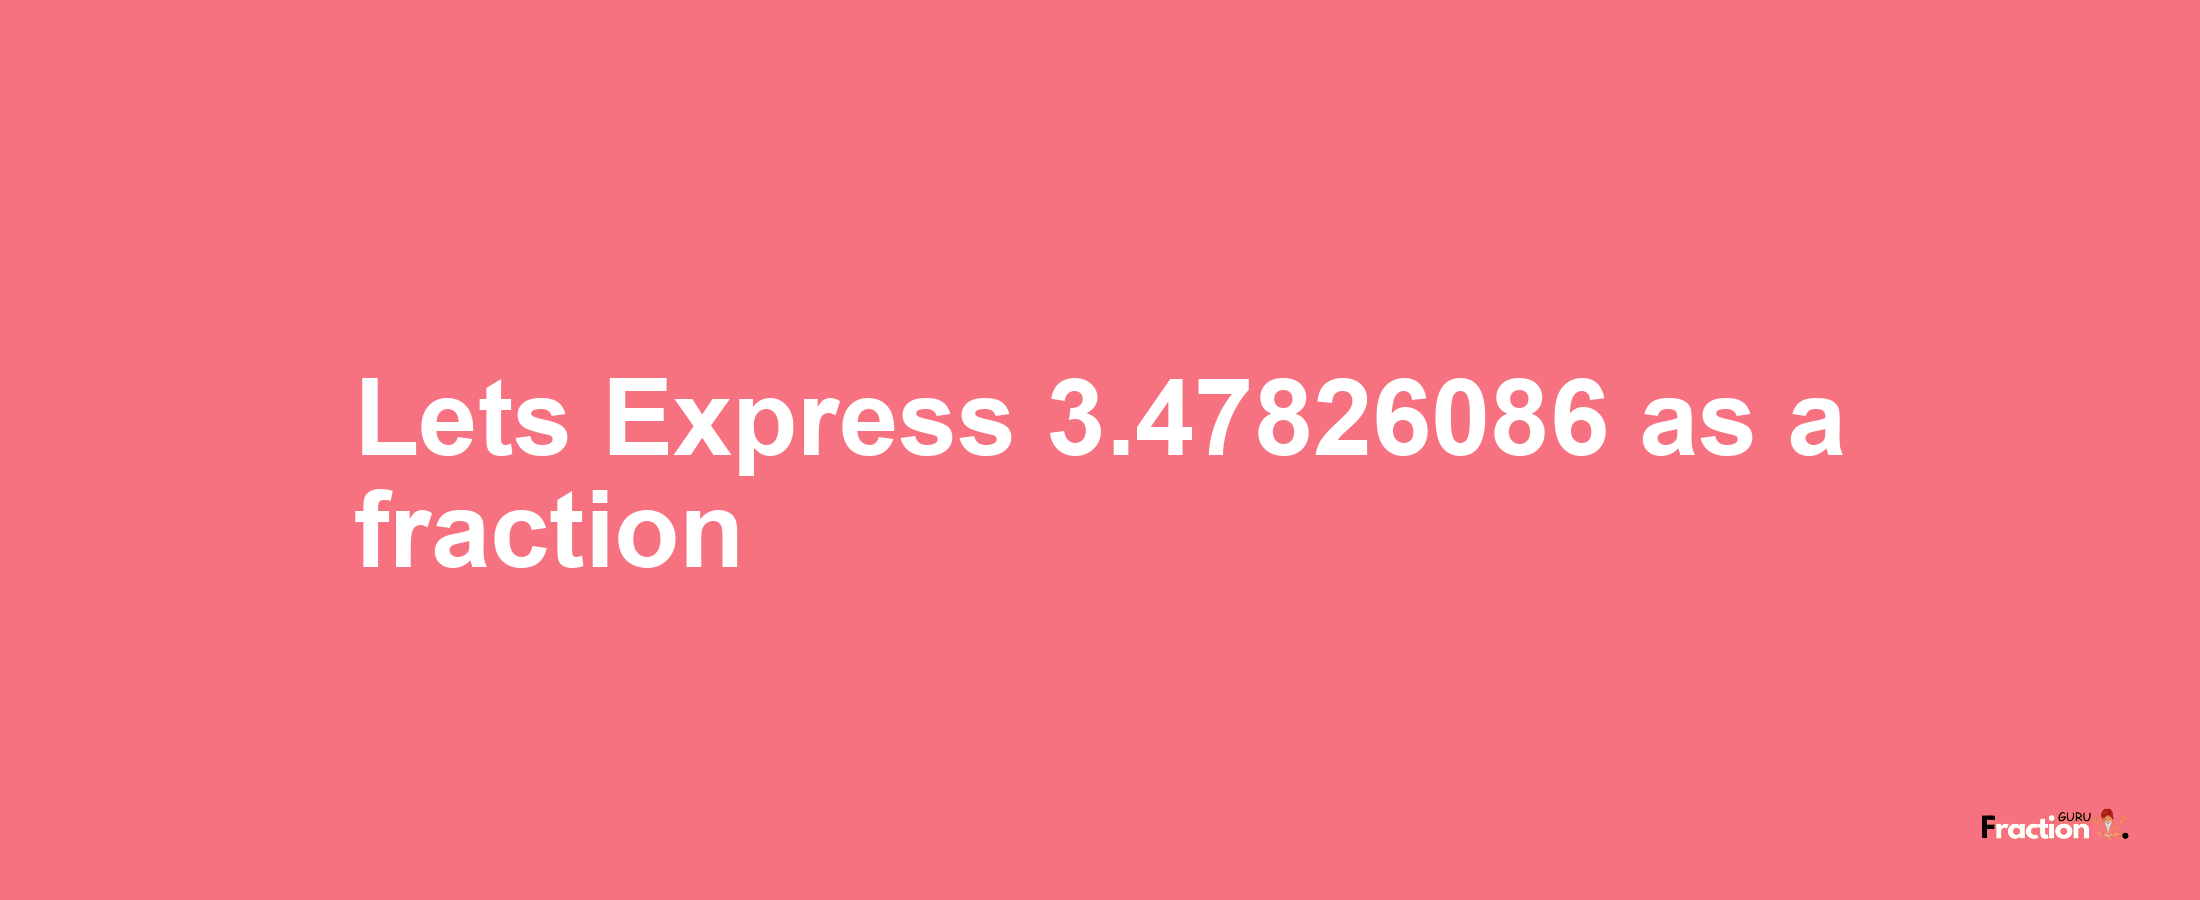 Lets Express 3.47826086 as afraction